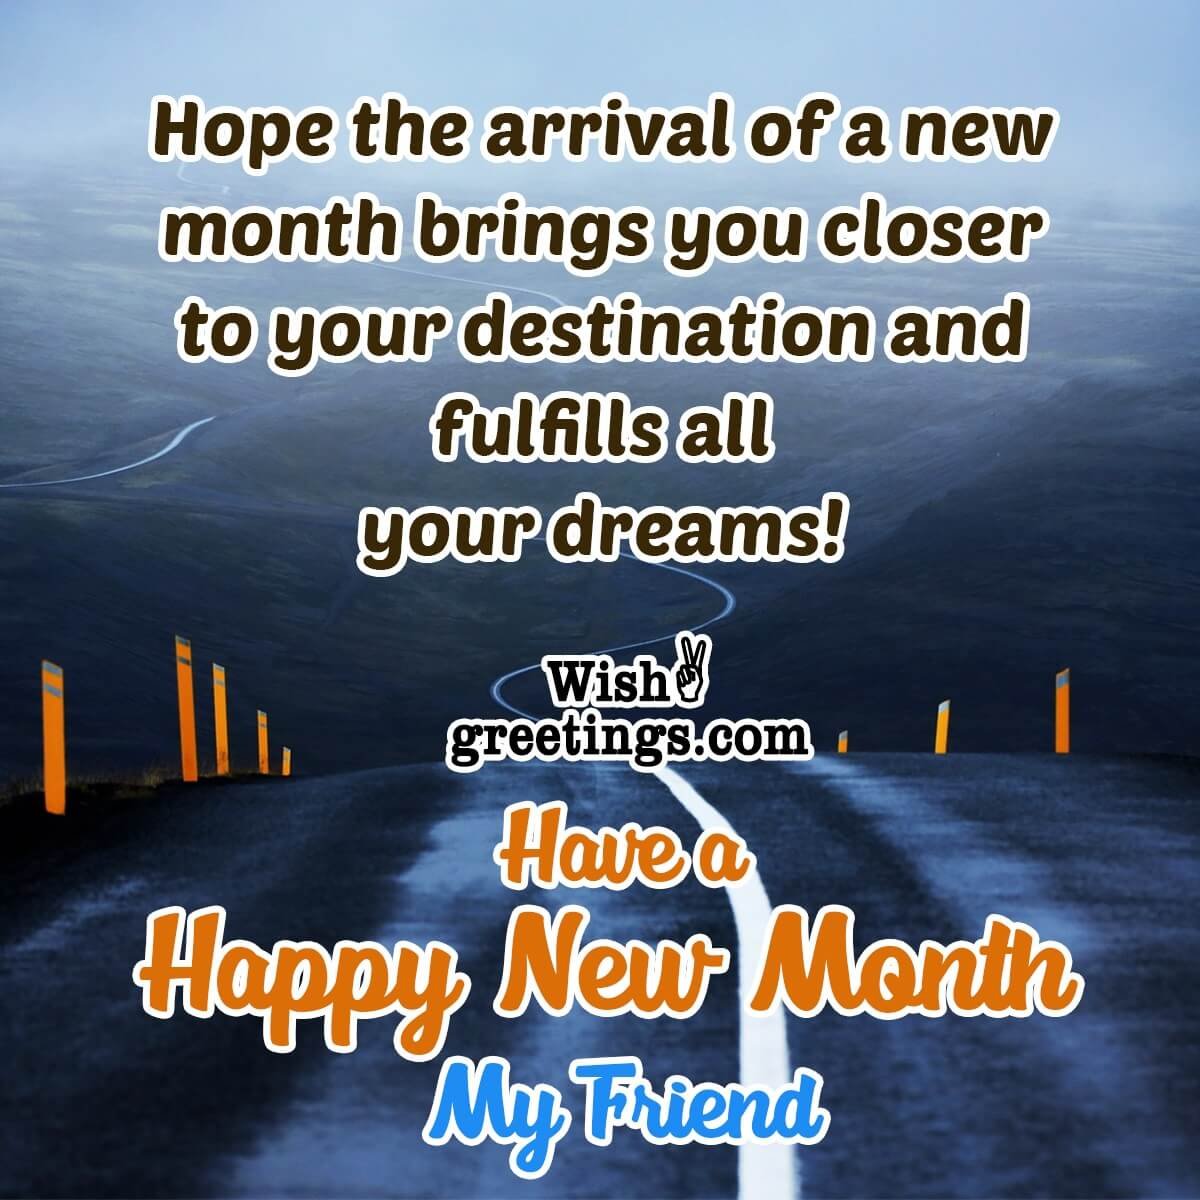 Have A Happy New Month, My Friend!